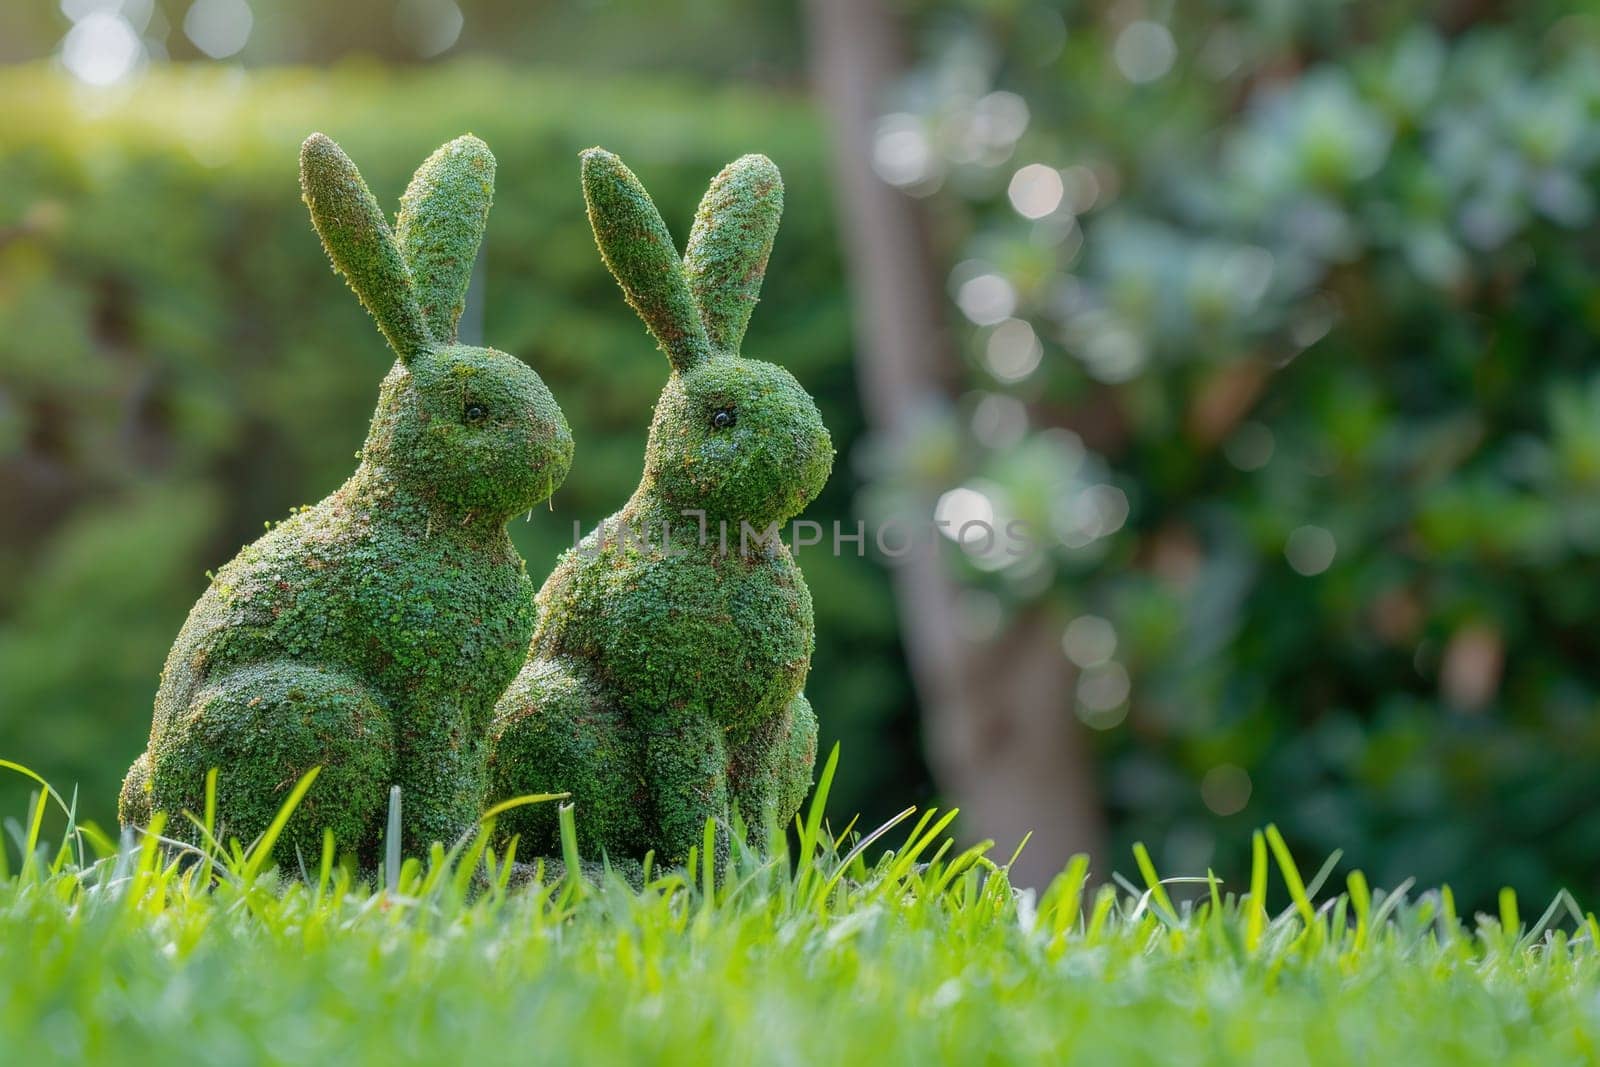 Two rabbits enjoying a tranquil moment in a beautiful green meadow with majestic trees in the background by Vichizh